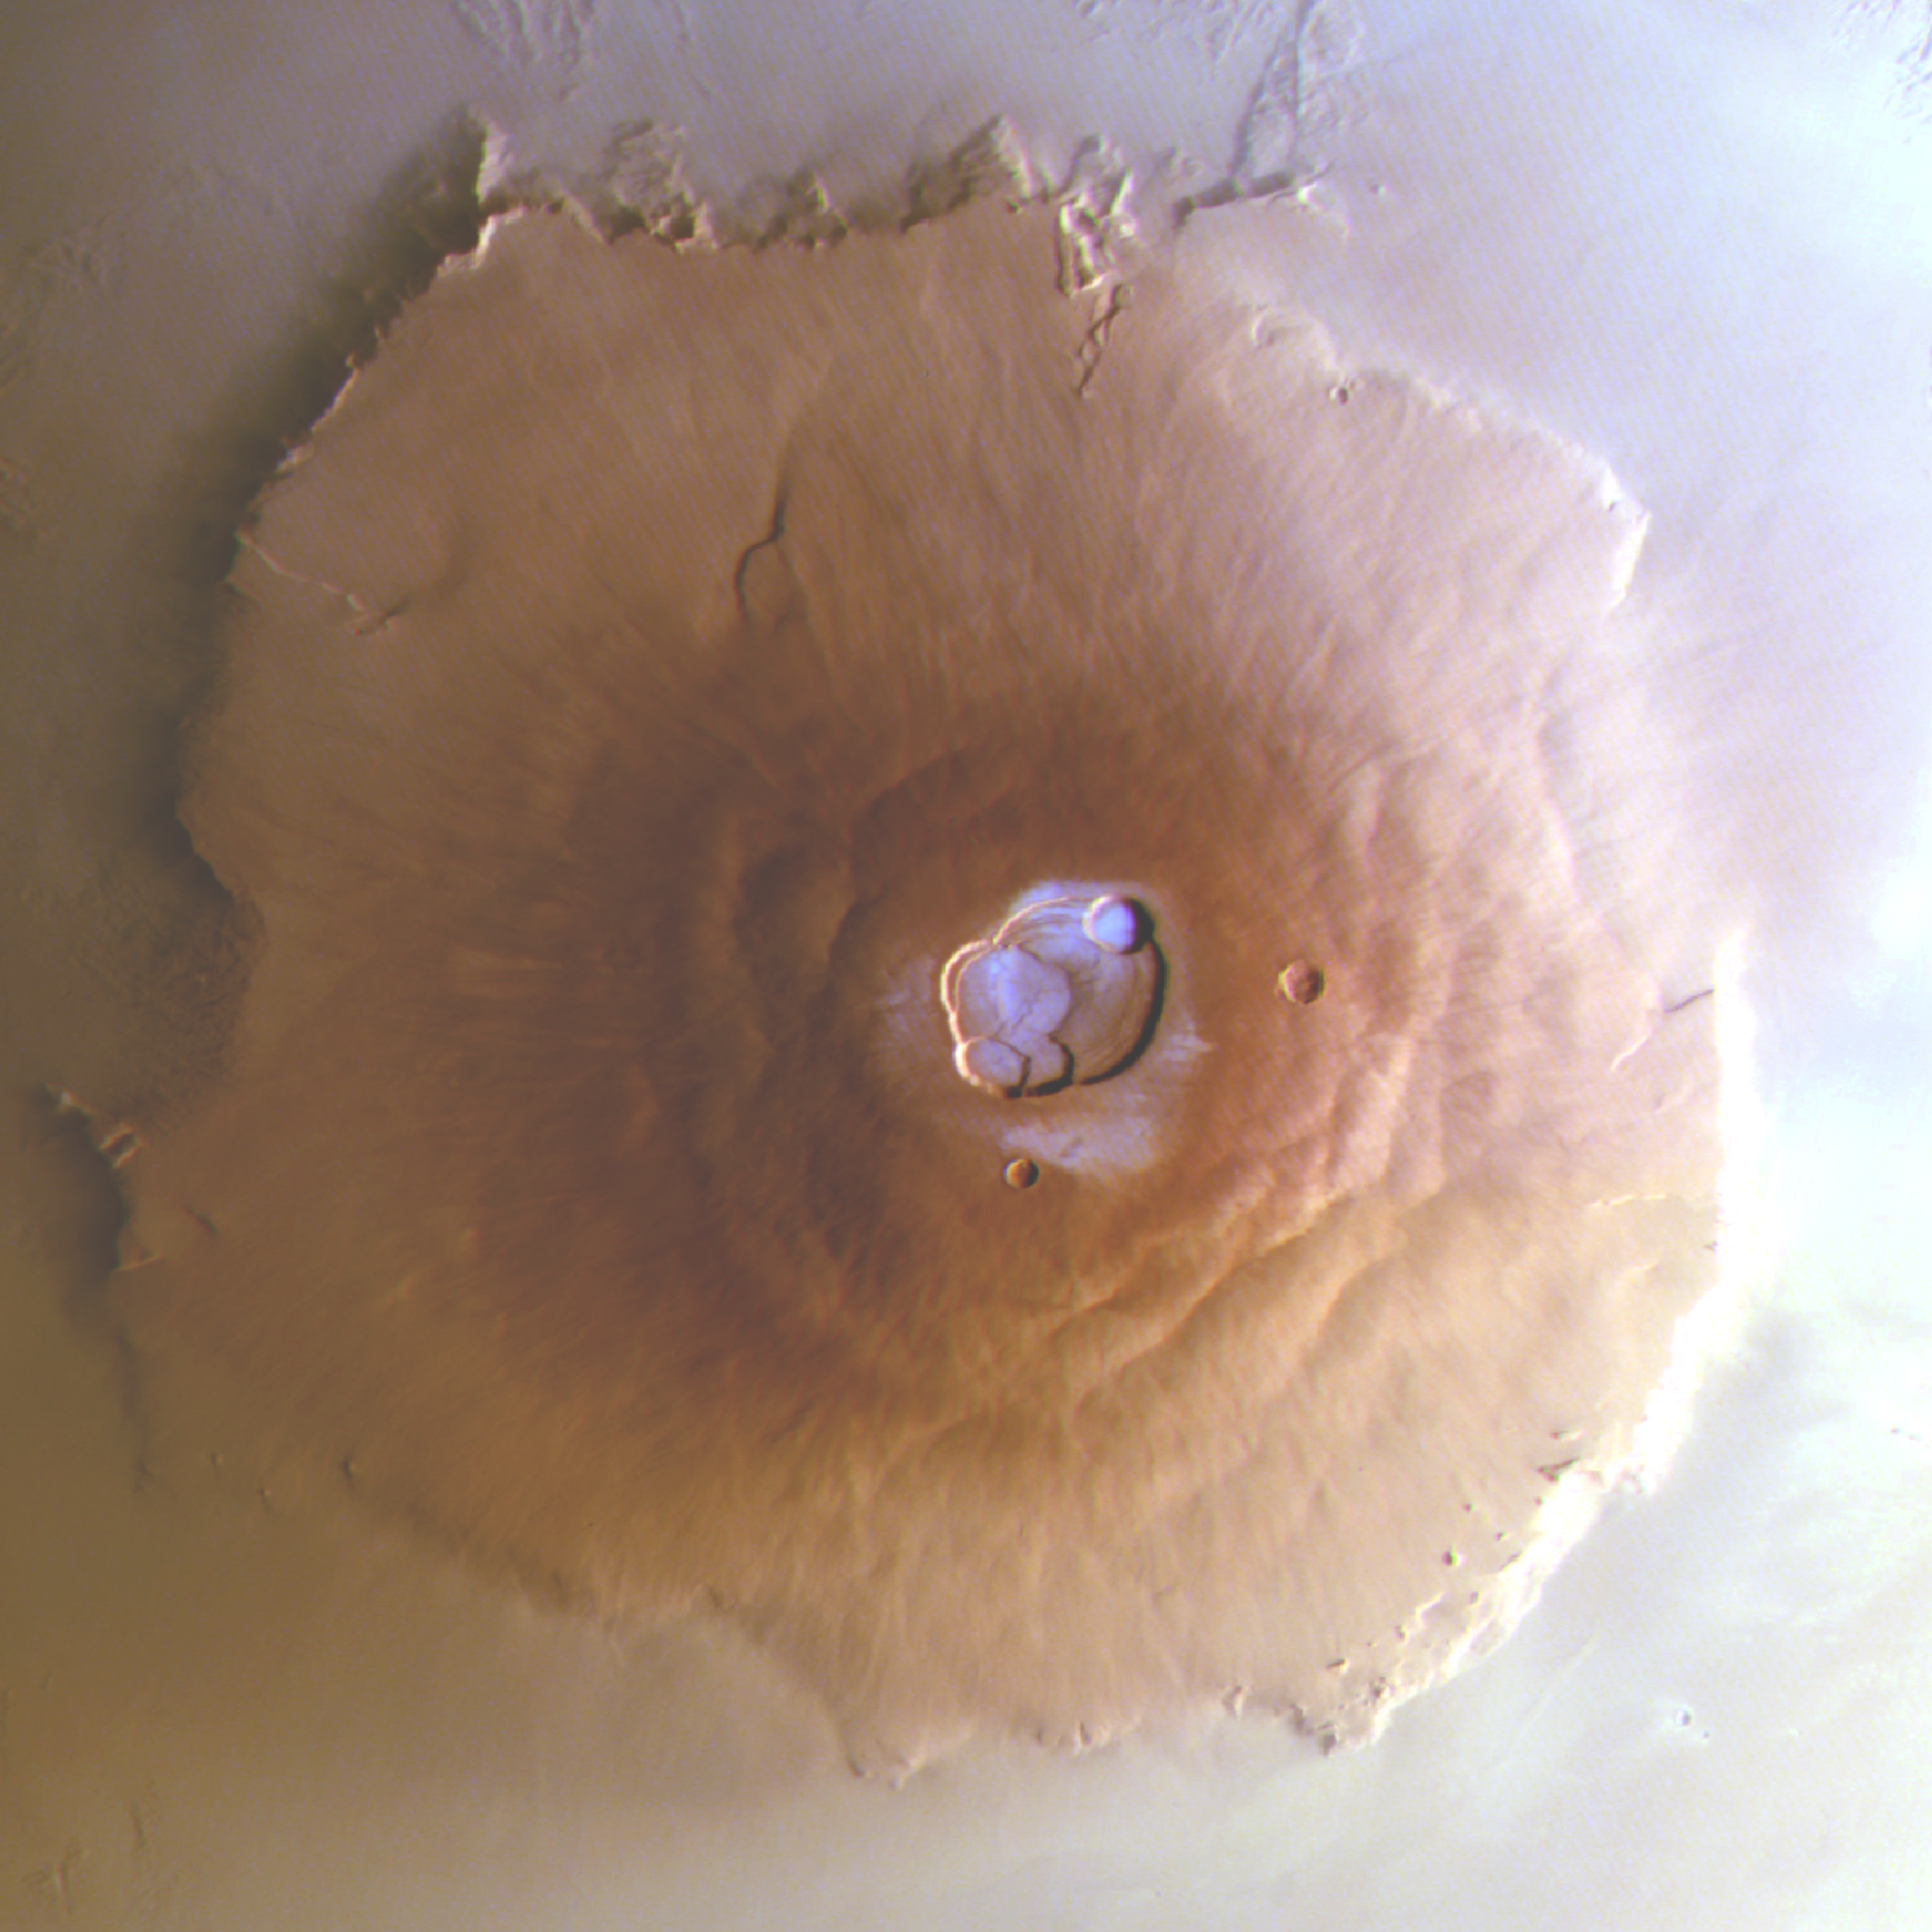 The summit of Olympus Mons on Mars, with frozen water visible in the crater.